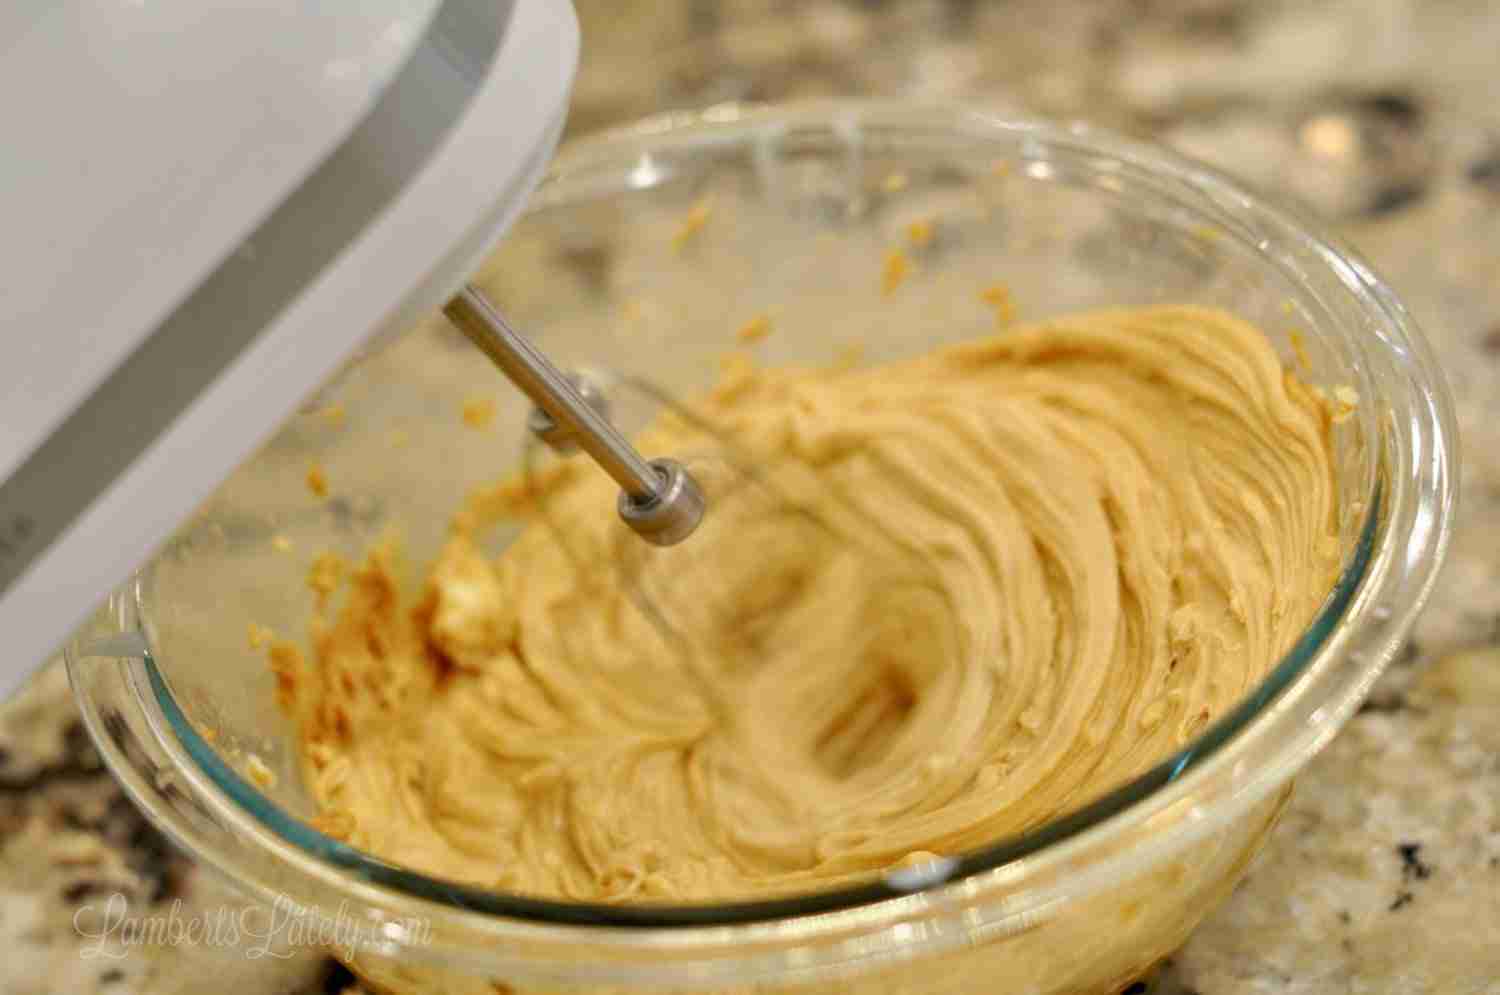 mixing peanut butter frosting with a hand mixer.